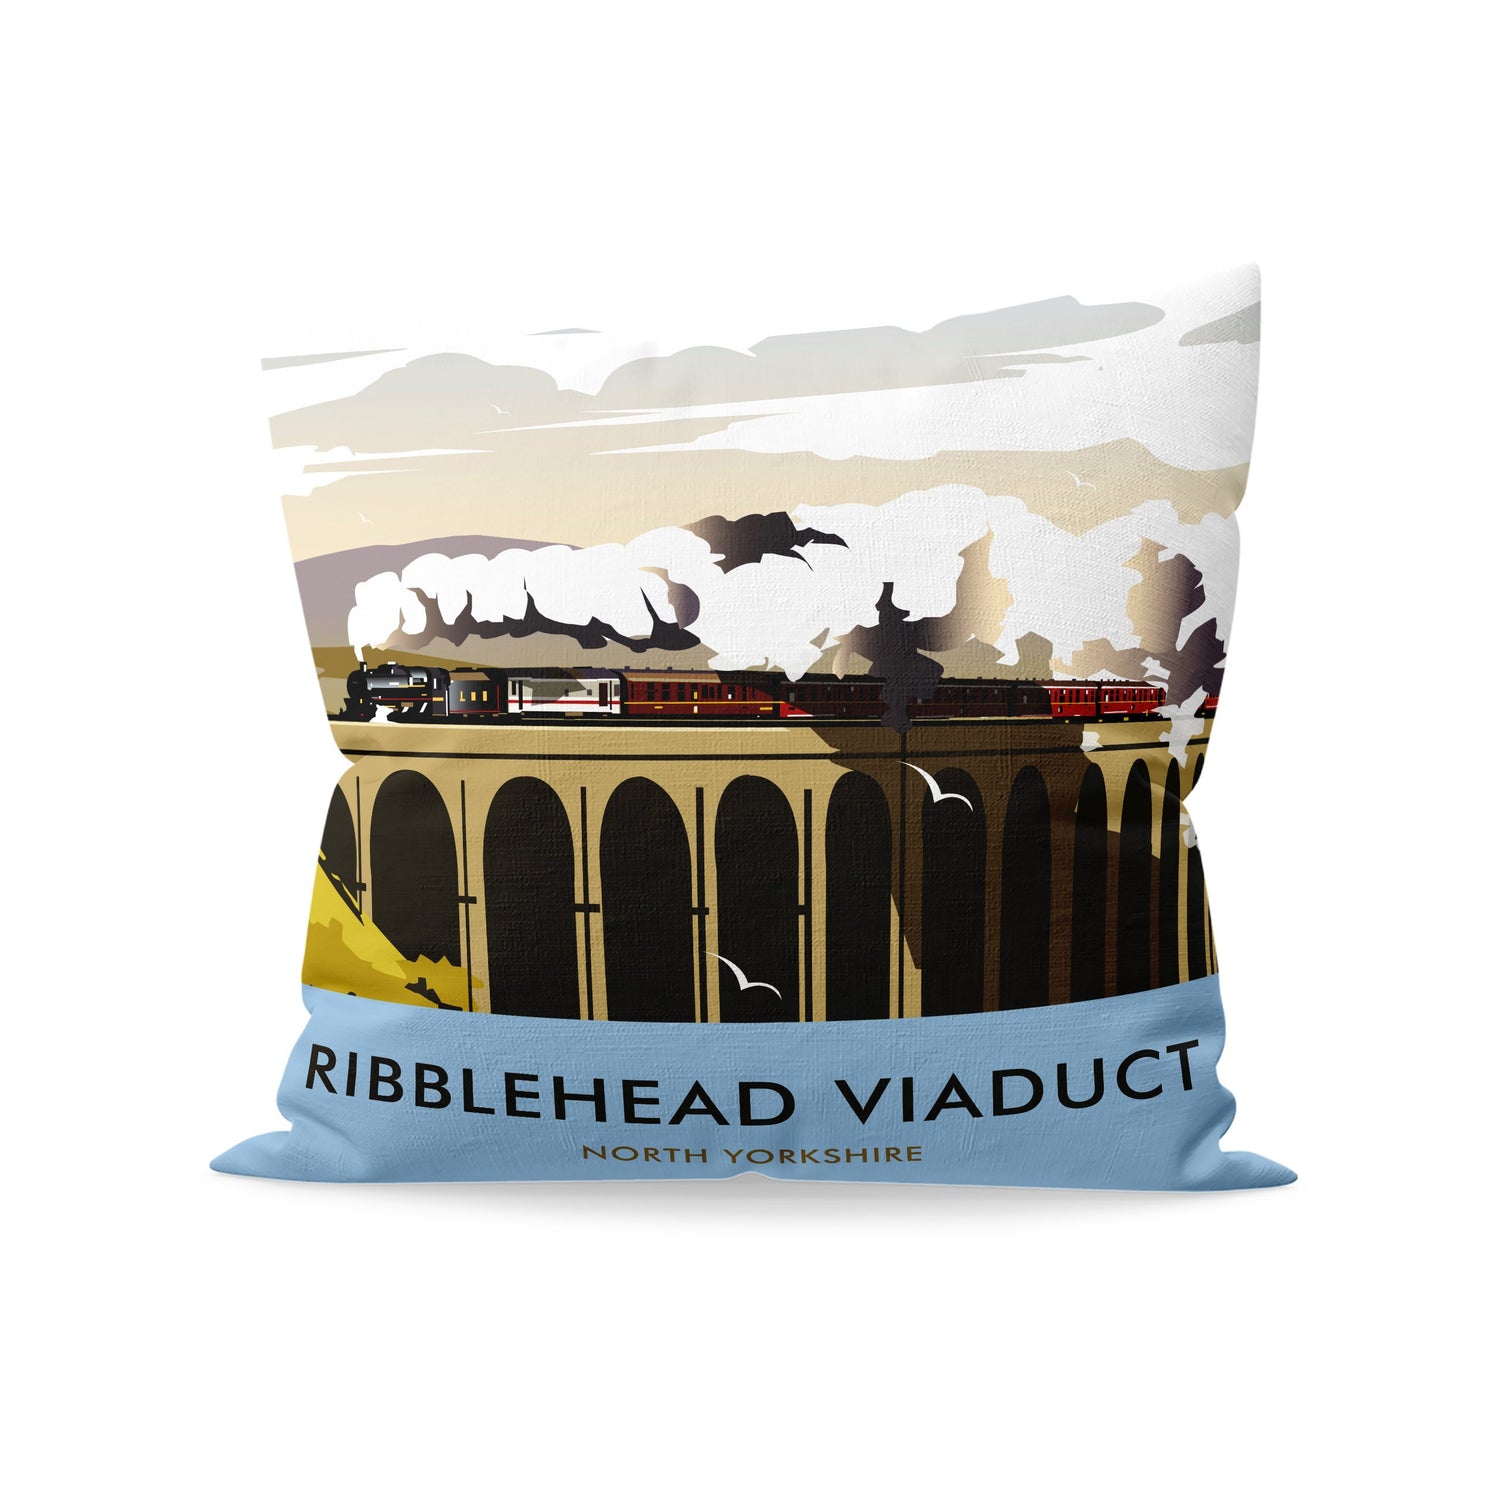 Ribblehead Viaduct, North Yorkshire Fibre Filled Cushion